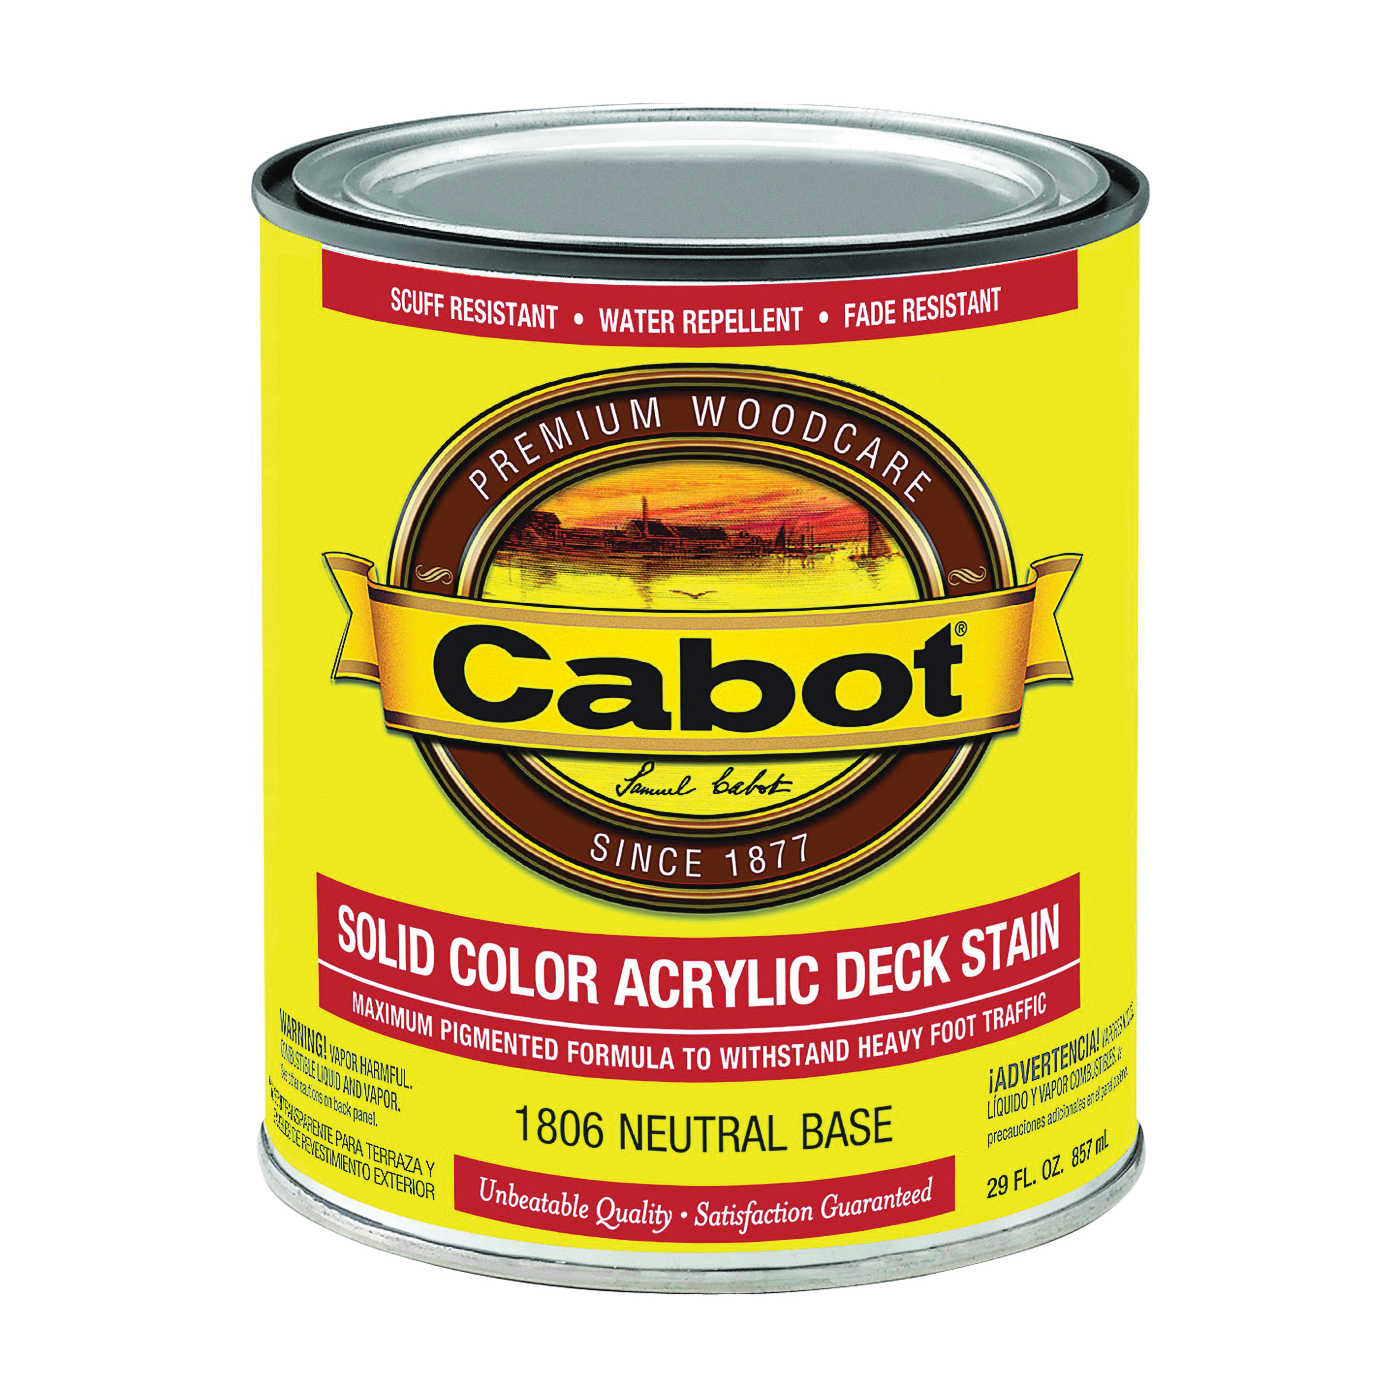 Cabot 140.0001806.005 Solid Stain, Low Luster, Neutral Base, Liquid, 1 qt, Can - 1